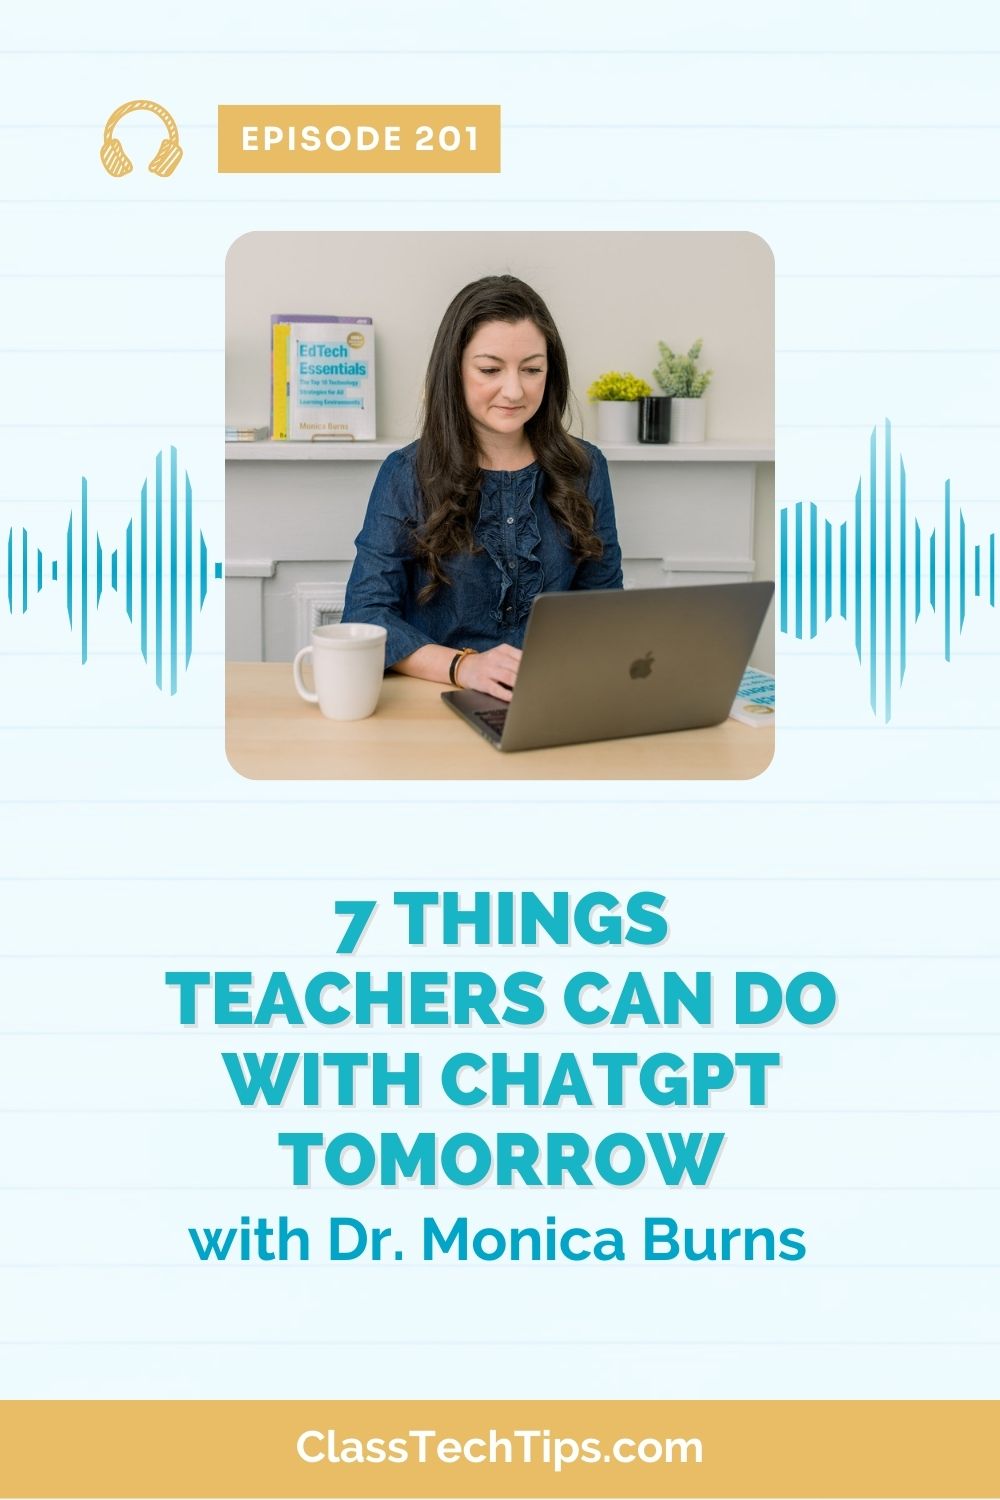 Learn seven things teachers can do with ChatGPT tomorrow to save time completing your daily tasks inside and outside of the classroom.